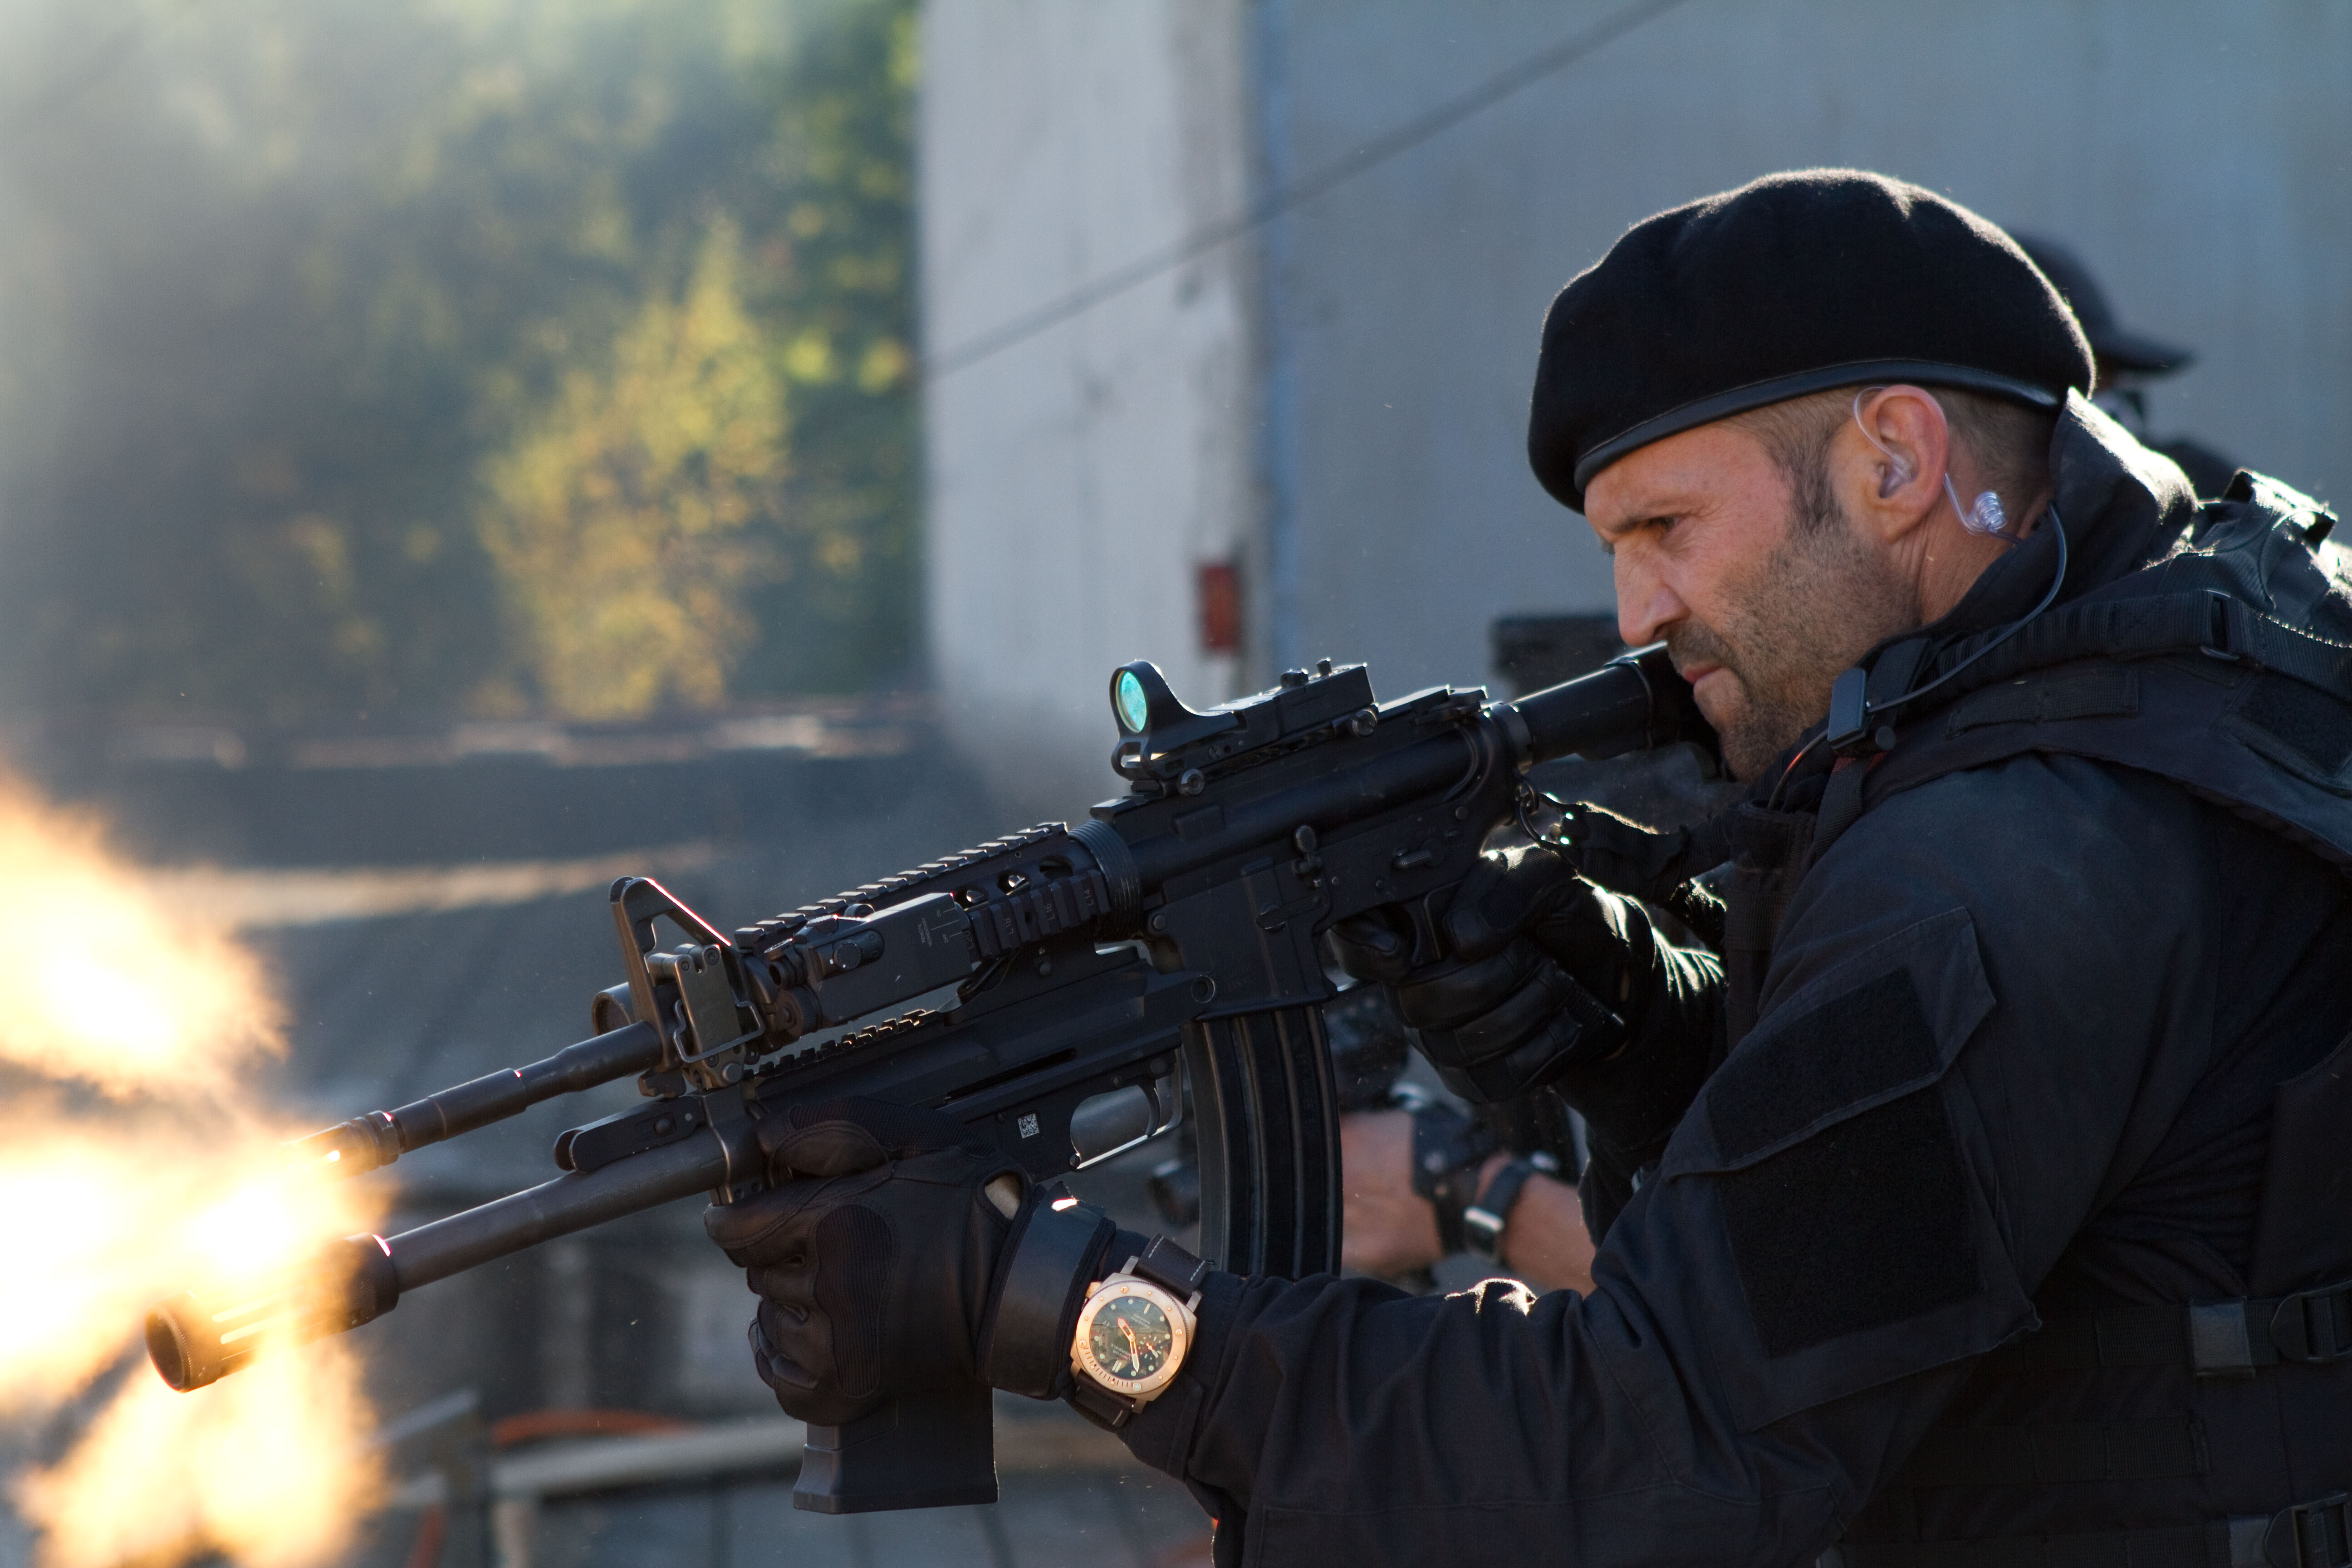 movie, the expendables 2, jason statham, lee christmas, the expendables